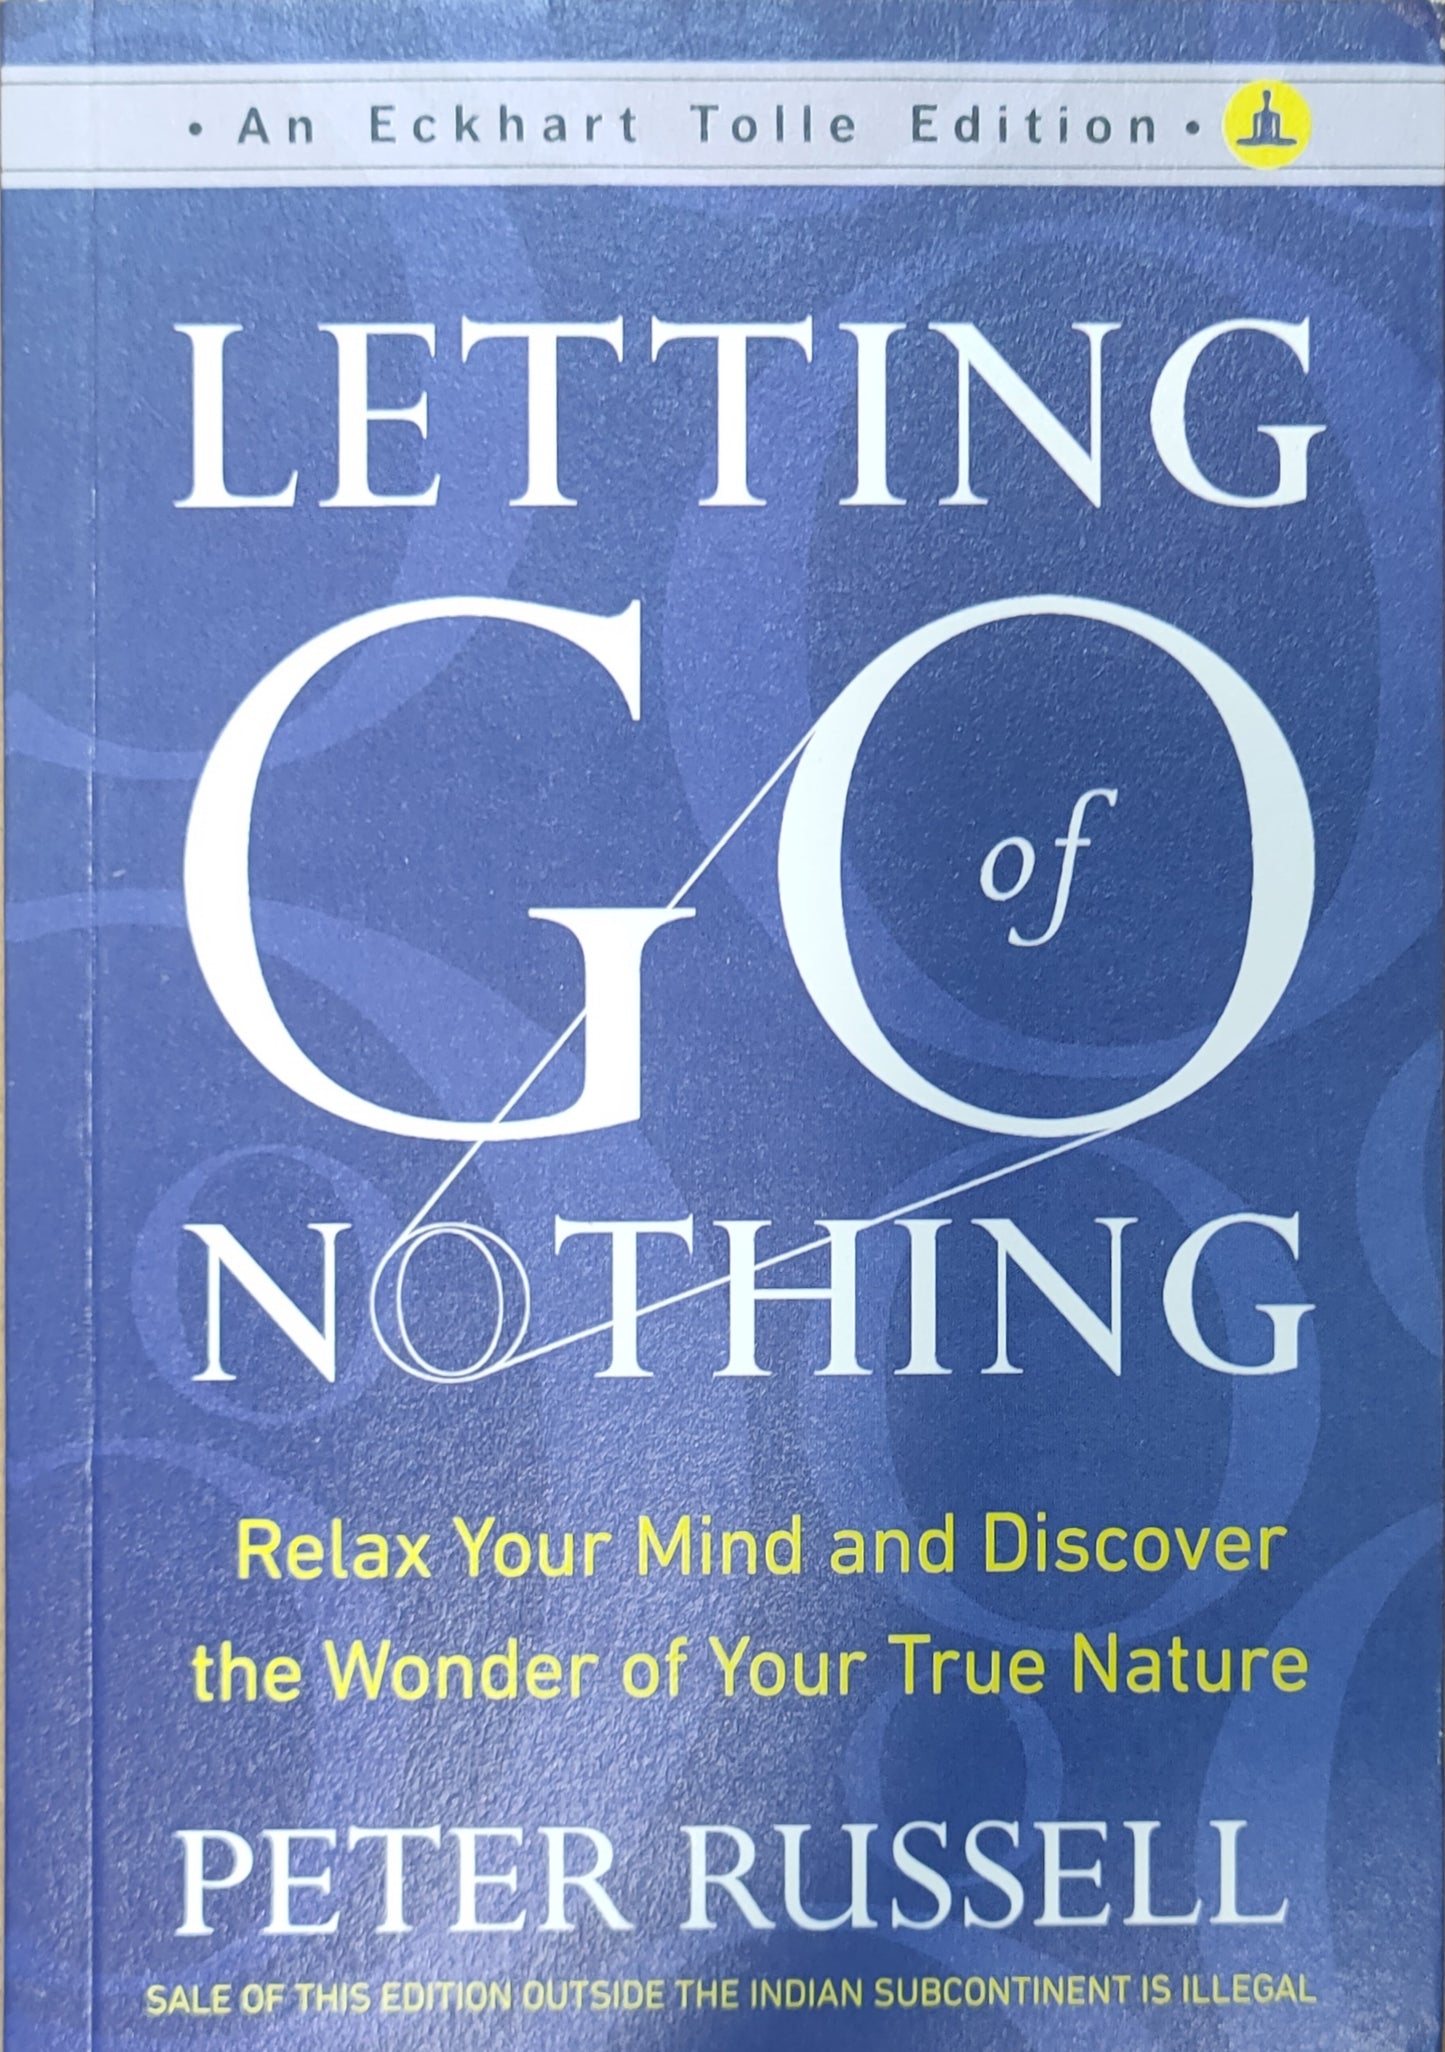 Letting go of nothing